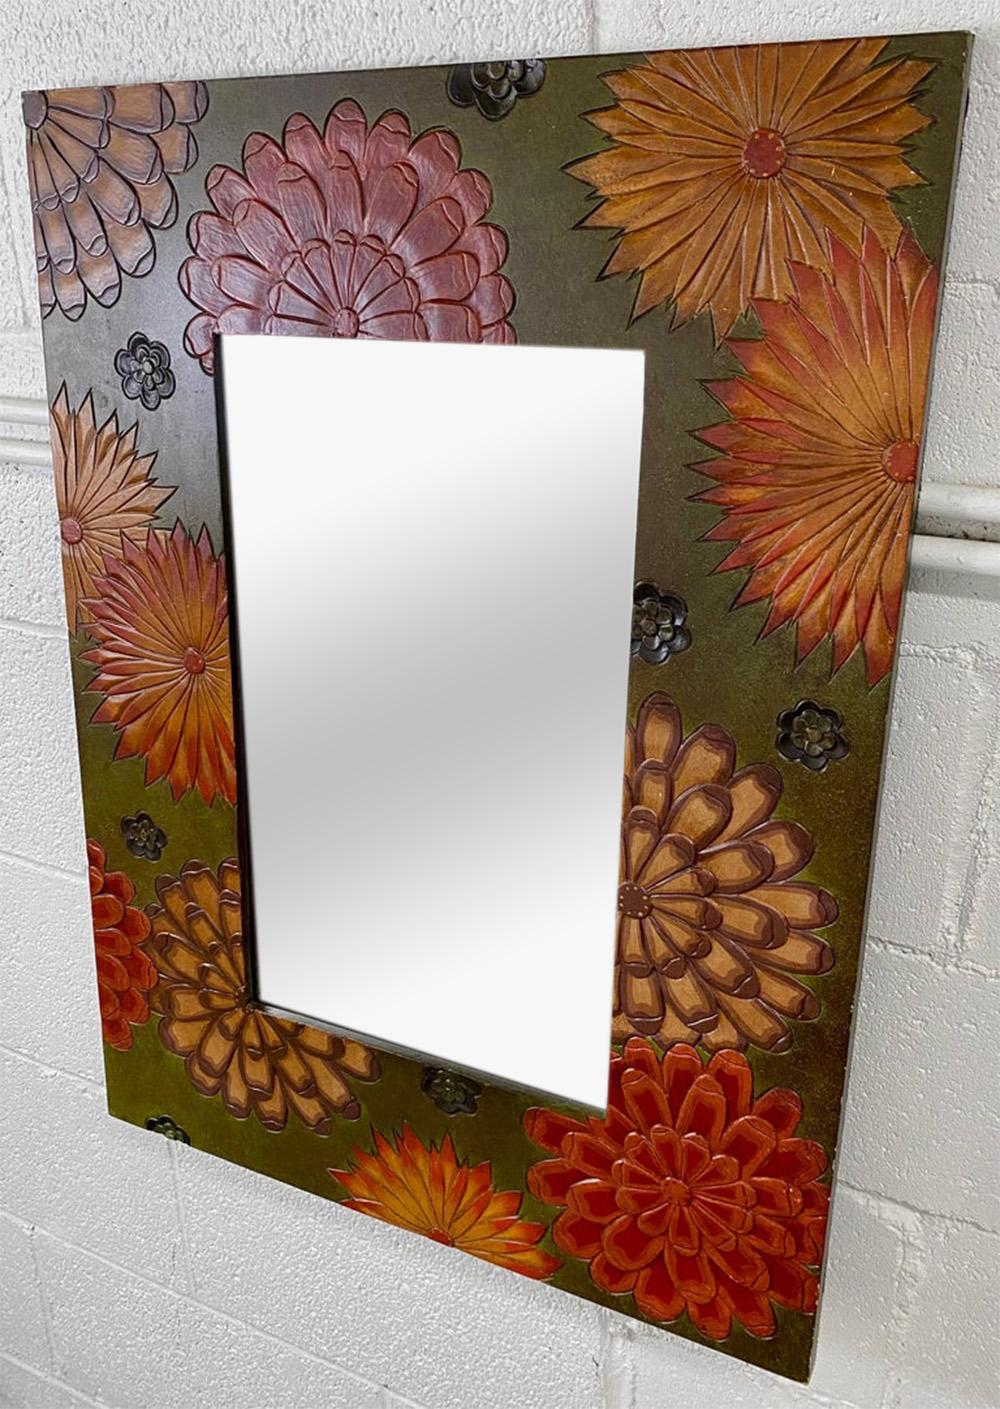 Bohemian Boho Chic  Sunflowers Design Wall or Vanity Mirror with Wooden Carved Frame  For Sale